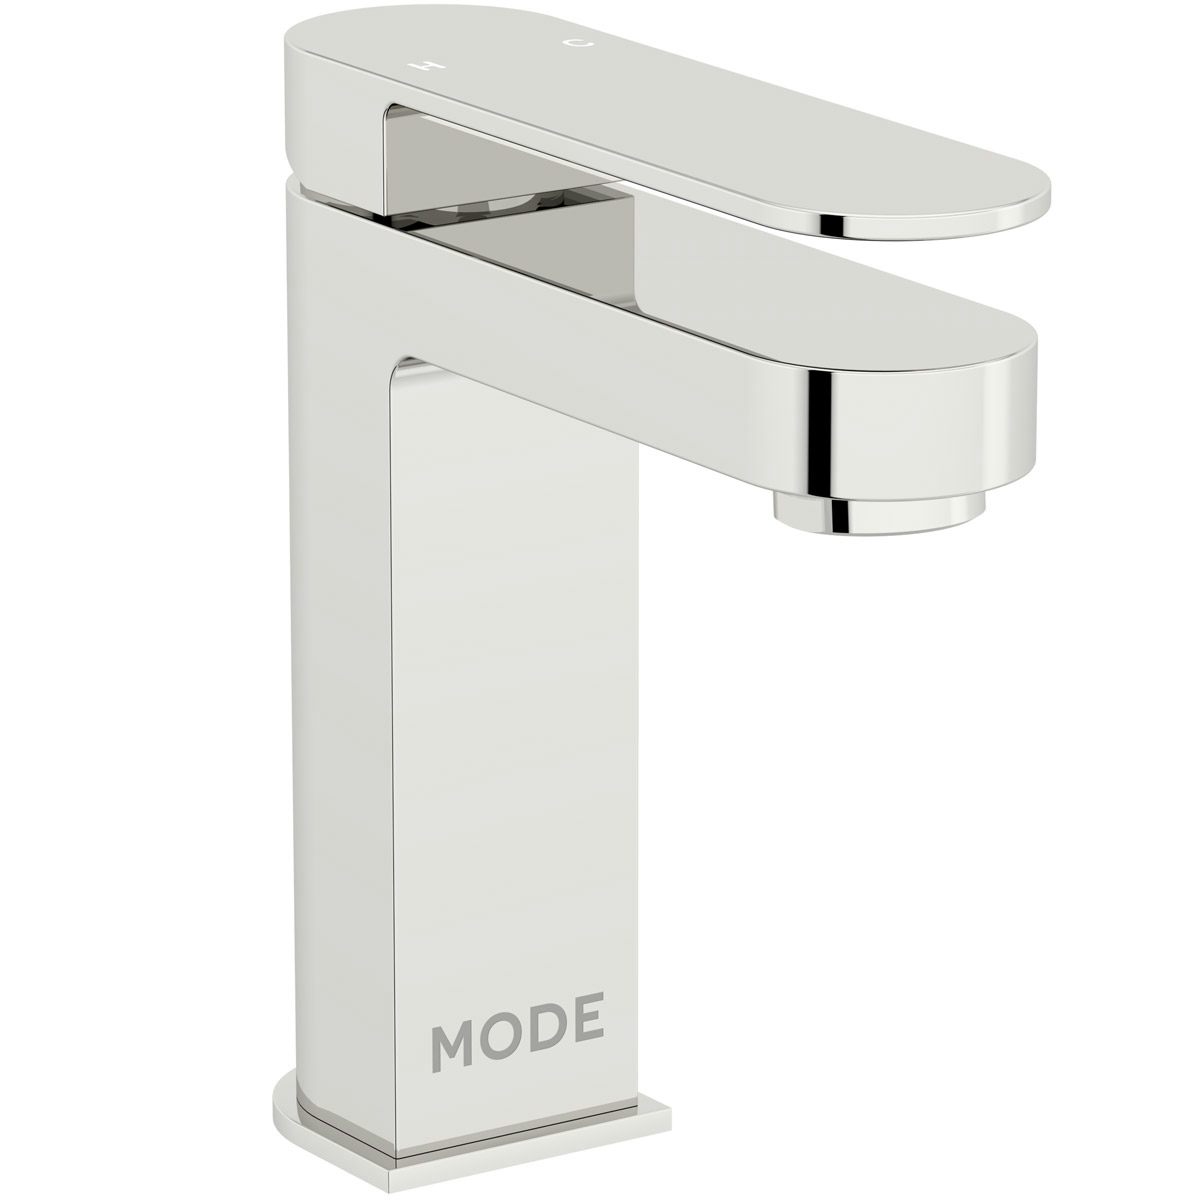 Mode Hardy basin mixer tap with unslotted waste